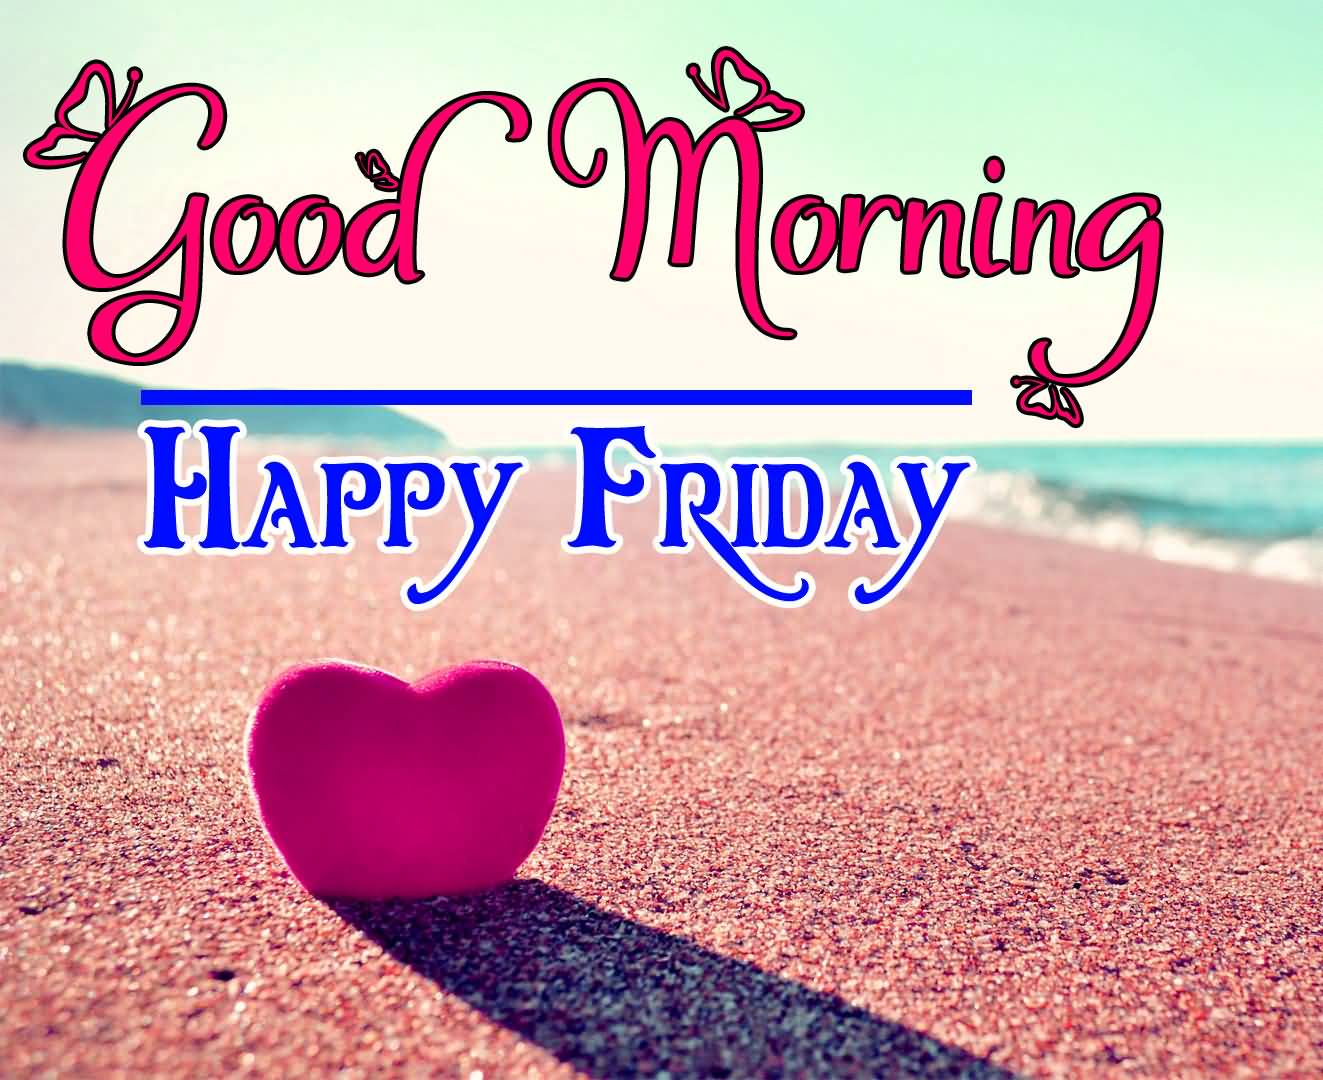 Here you will get some amazing Good Morning Happy Friday pictures that make...